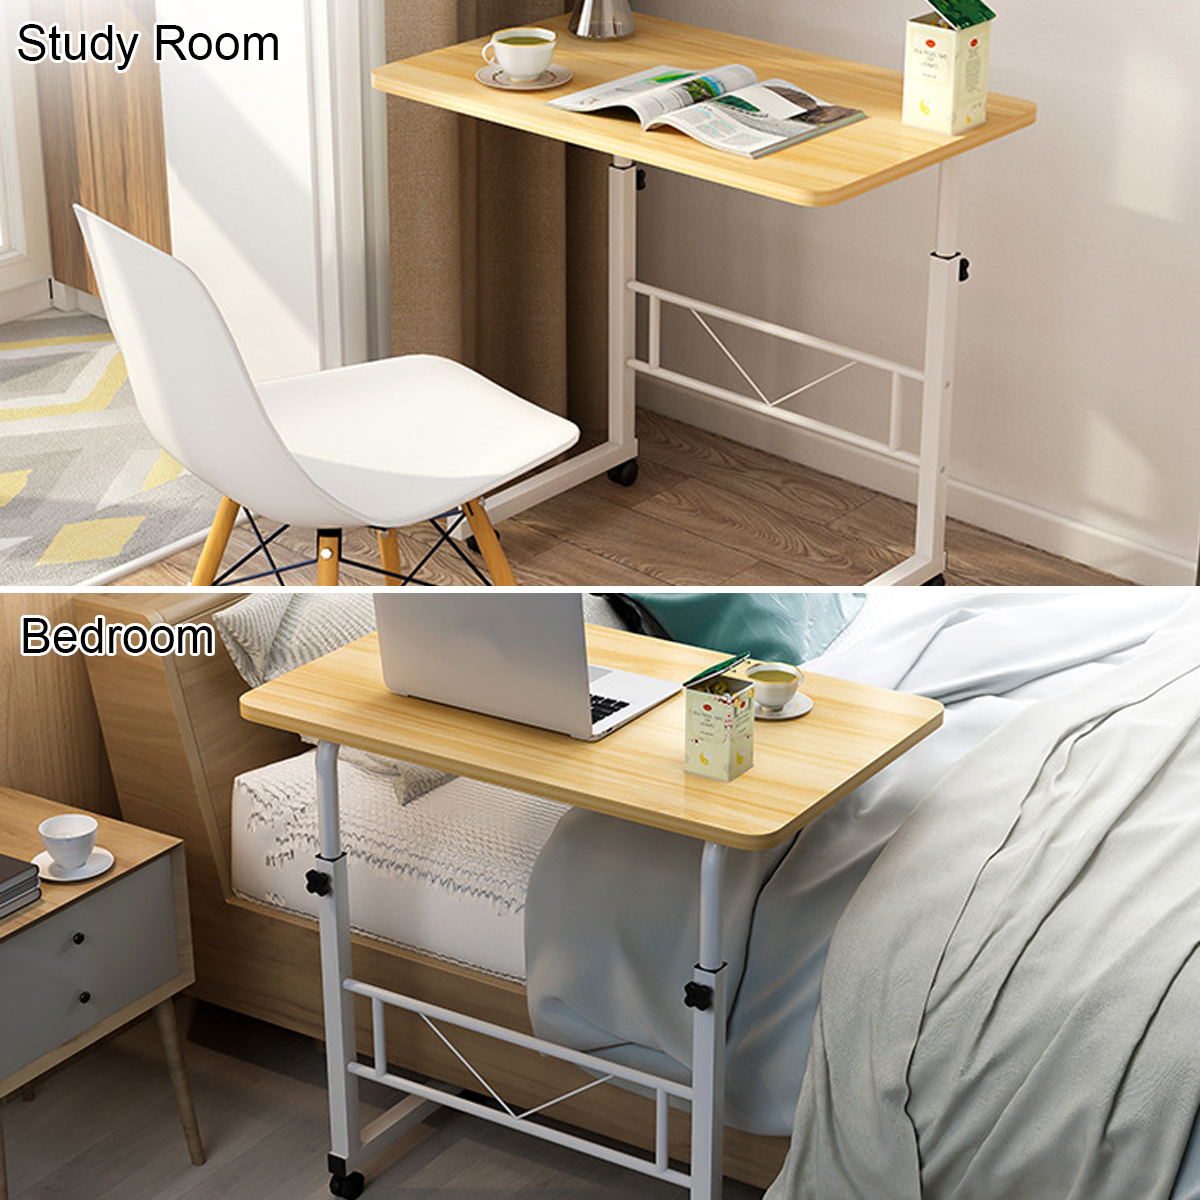 Removable-Laptop-Table-Lifting-Desk-Tabletop-Food-Tray-Bedside-Table-Bed-Sofa-Stand-with-Wheel-1754628-9